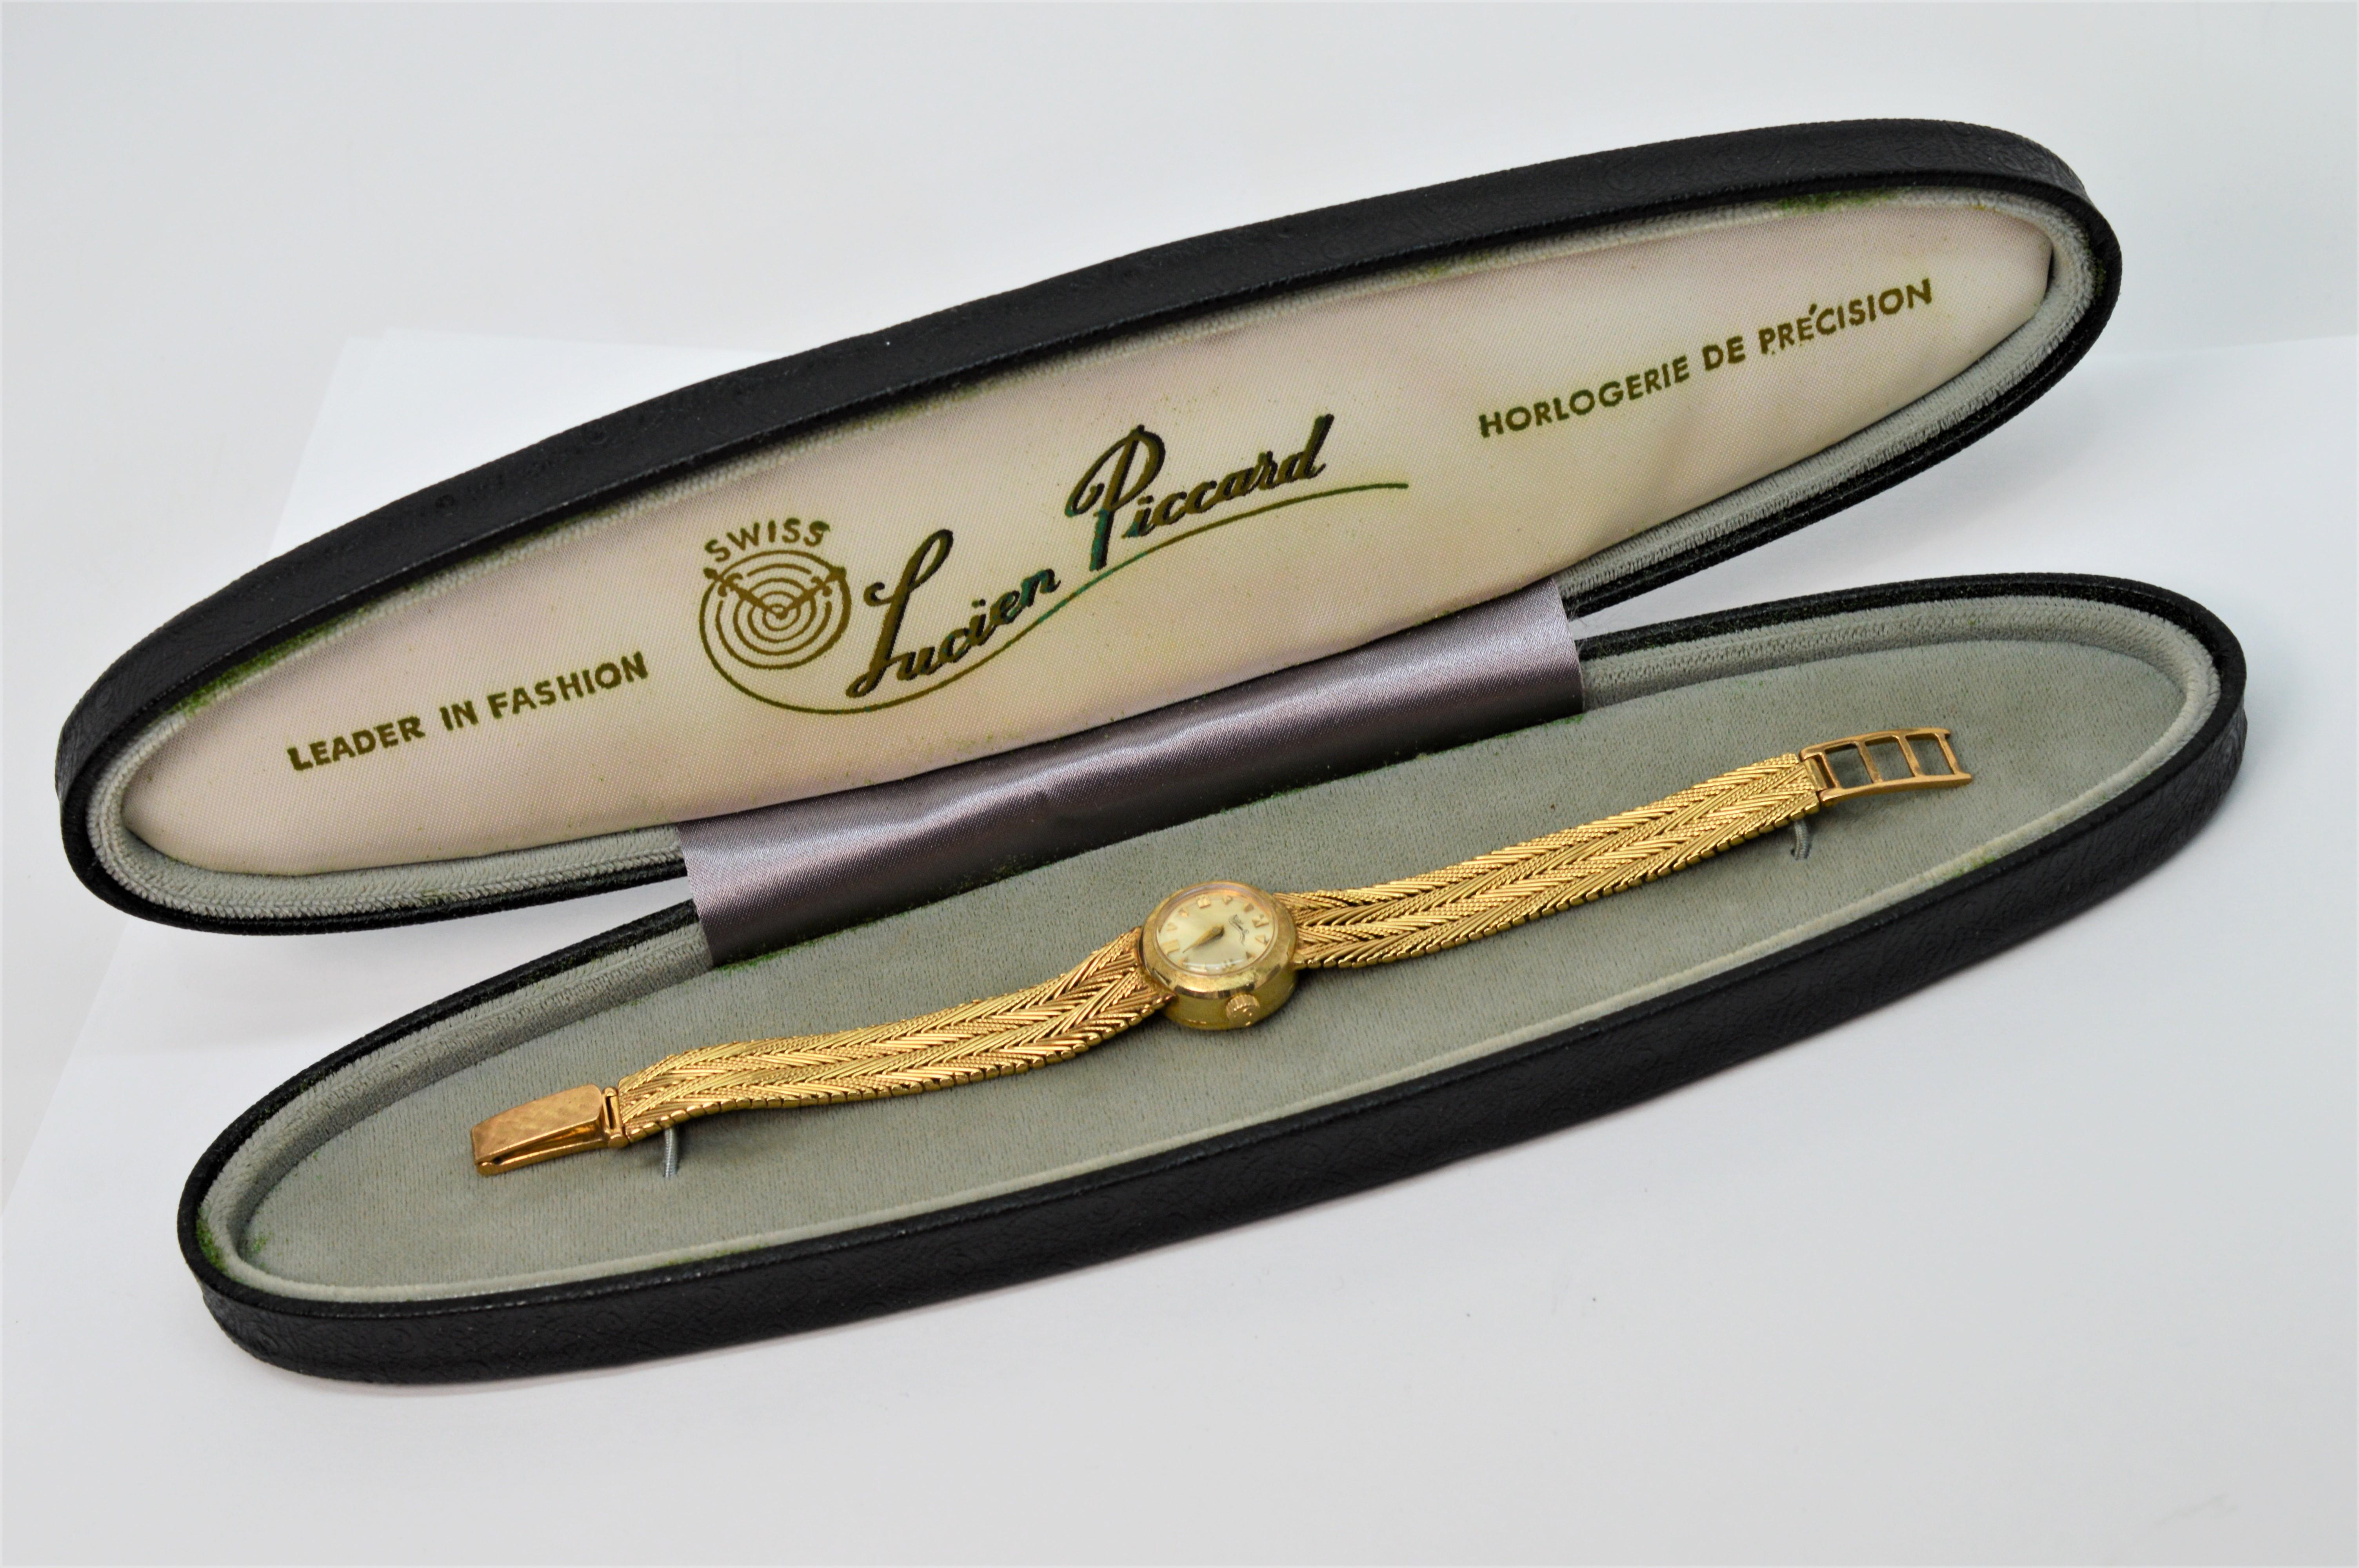 This circa 1960's Ladies Lucien Piccard fourteen karat 14K yellow gold wrist watch delivers true sophistication and functional elegance. The watch's vintage style and proportions make it a versatile piece to complement day or evening wear. With an